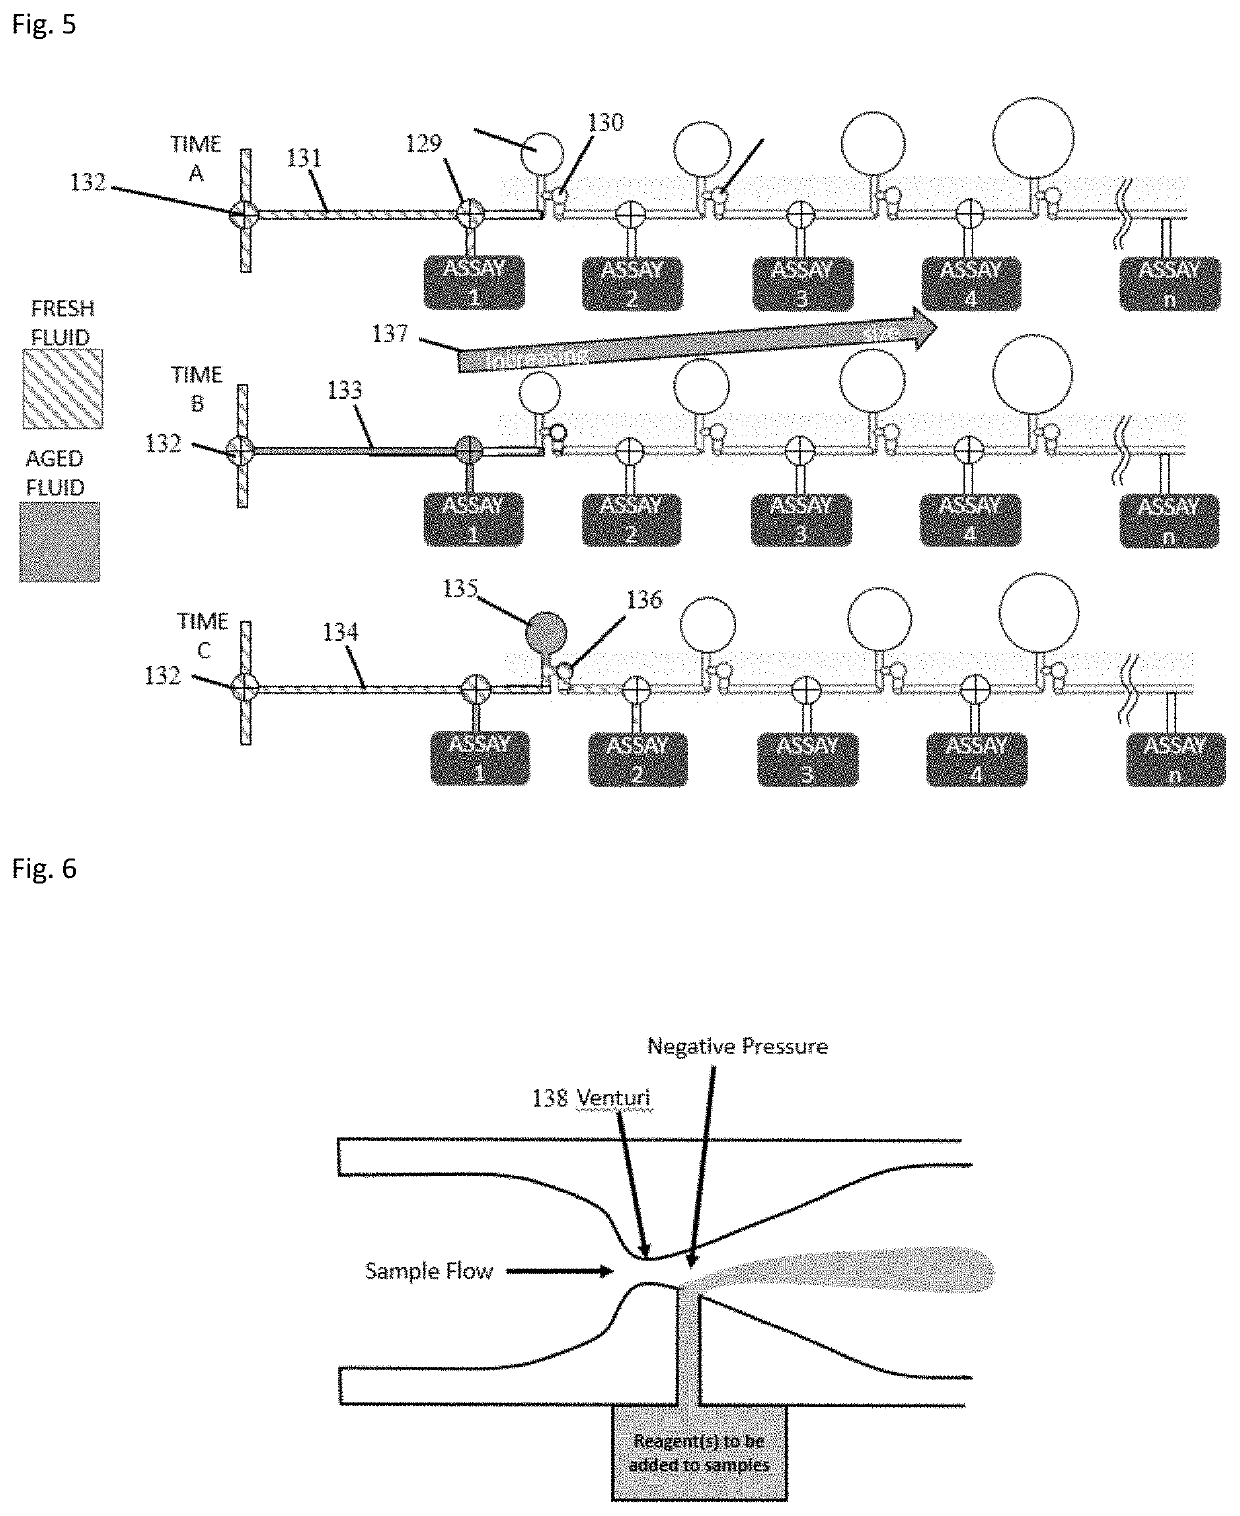 Computerized Fluidic System and Methods of Use for Characterization of Molecular Networks in Complex Systems with Automated Sampling, Data Collection, Assays and Data Analytics